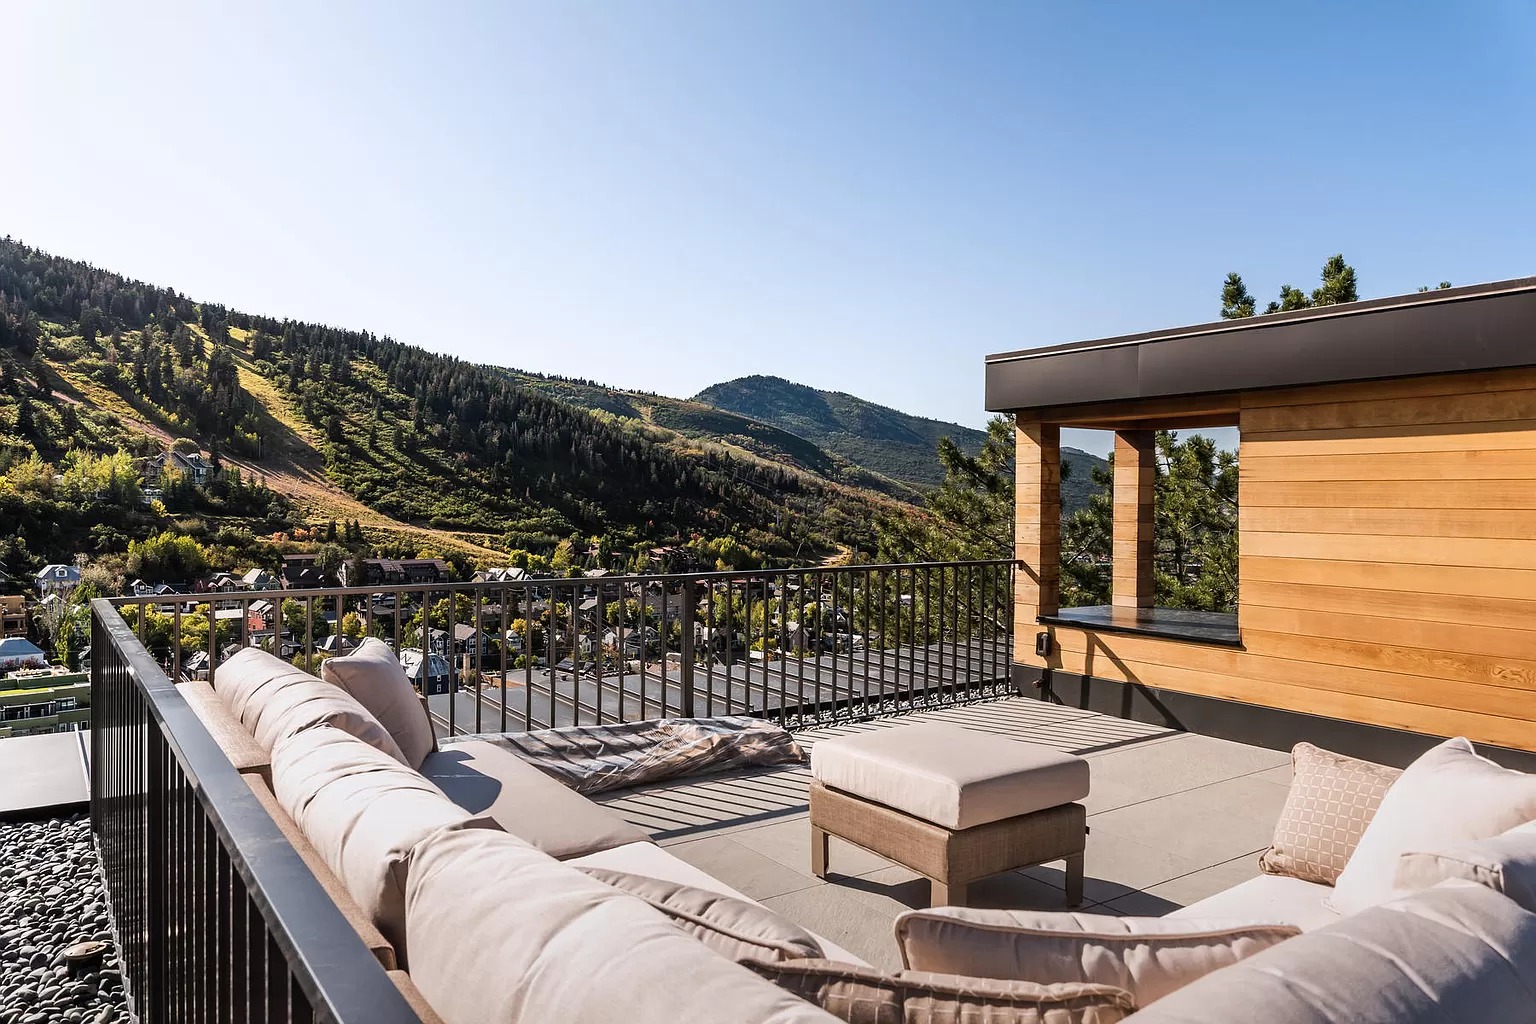 331 Mchenry Ave, Park City, UT 84060 - $7,850,000 home for sale, house images, photos and pics gallery